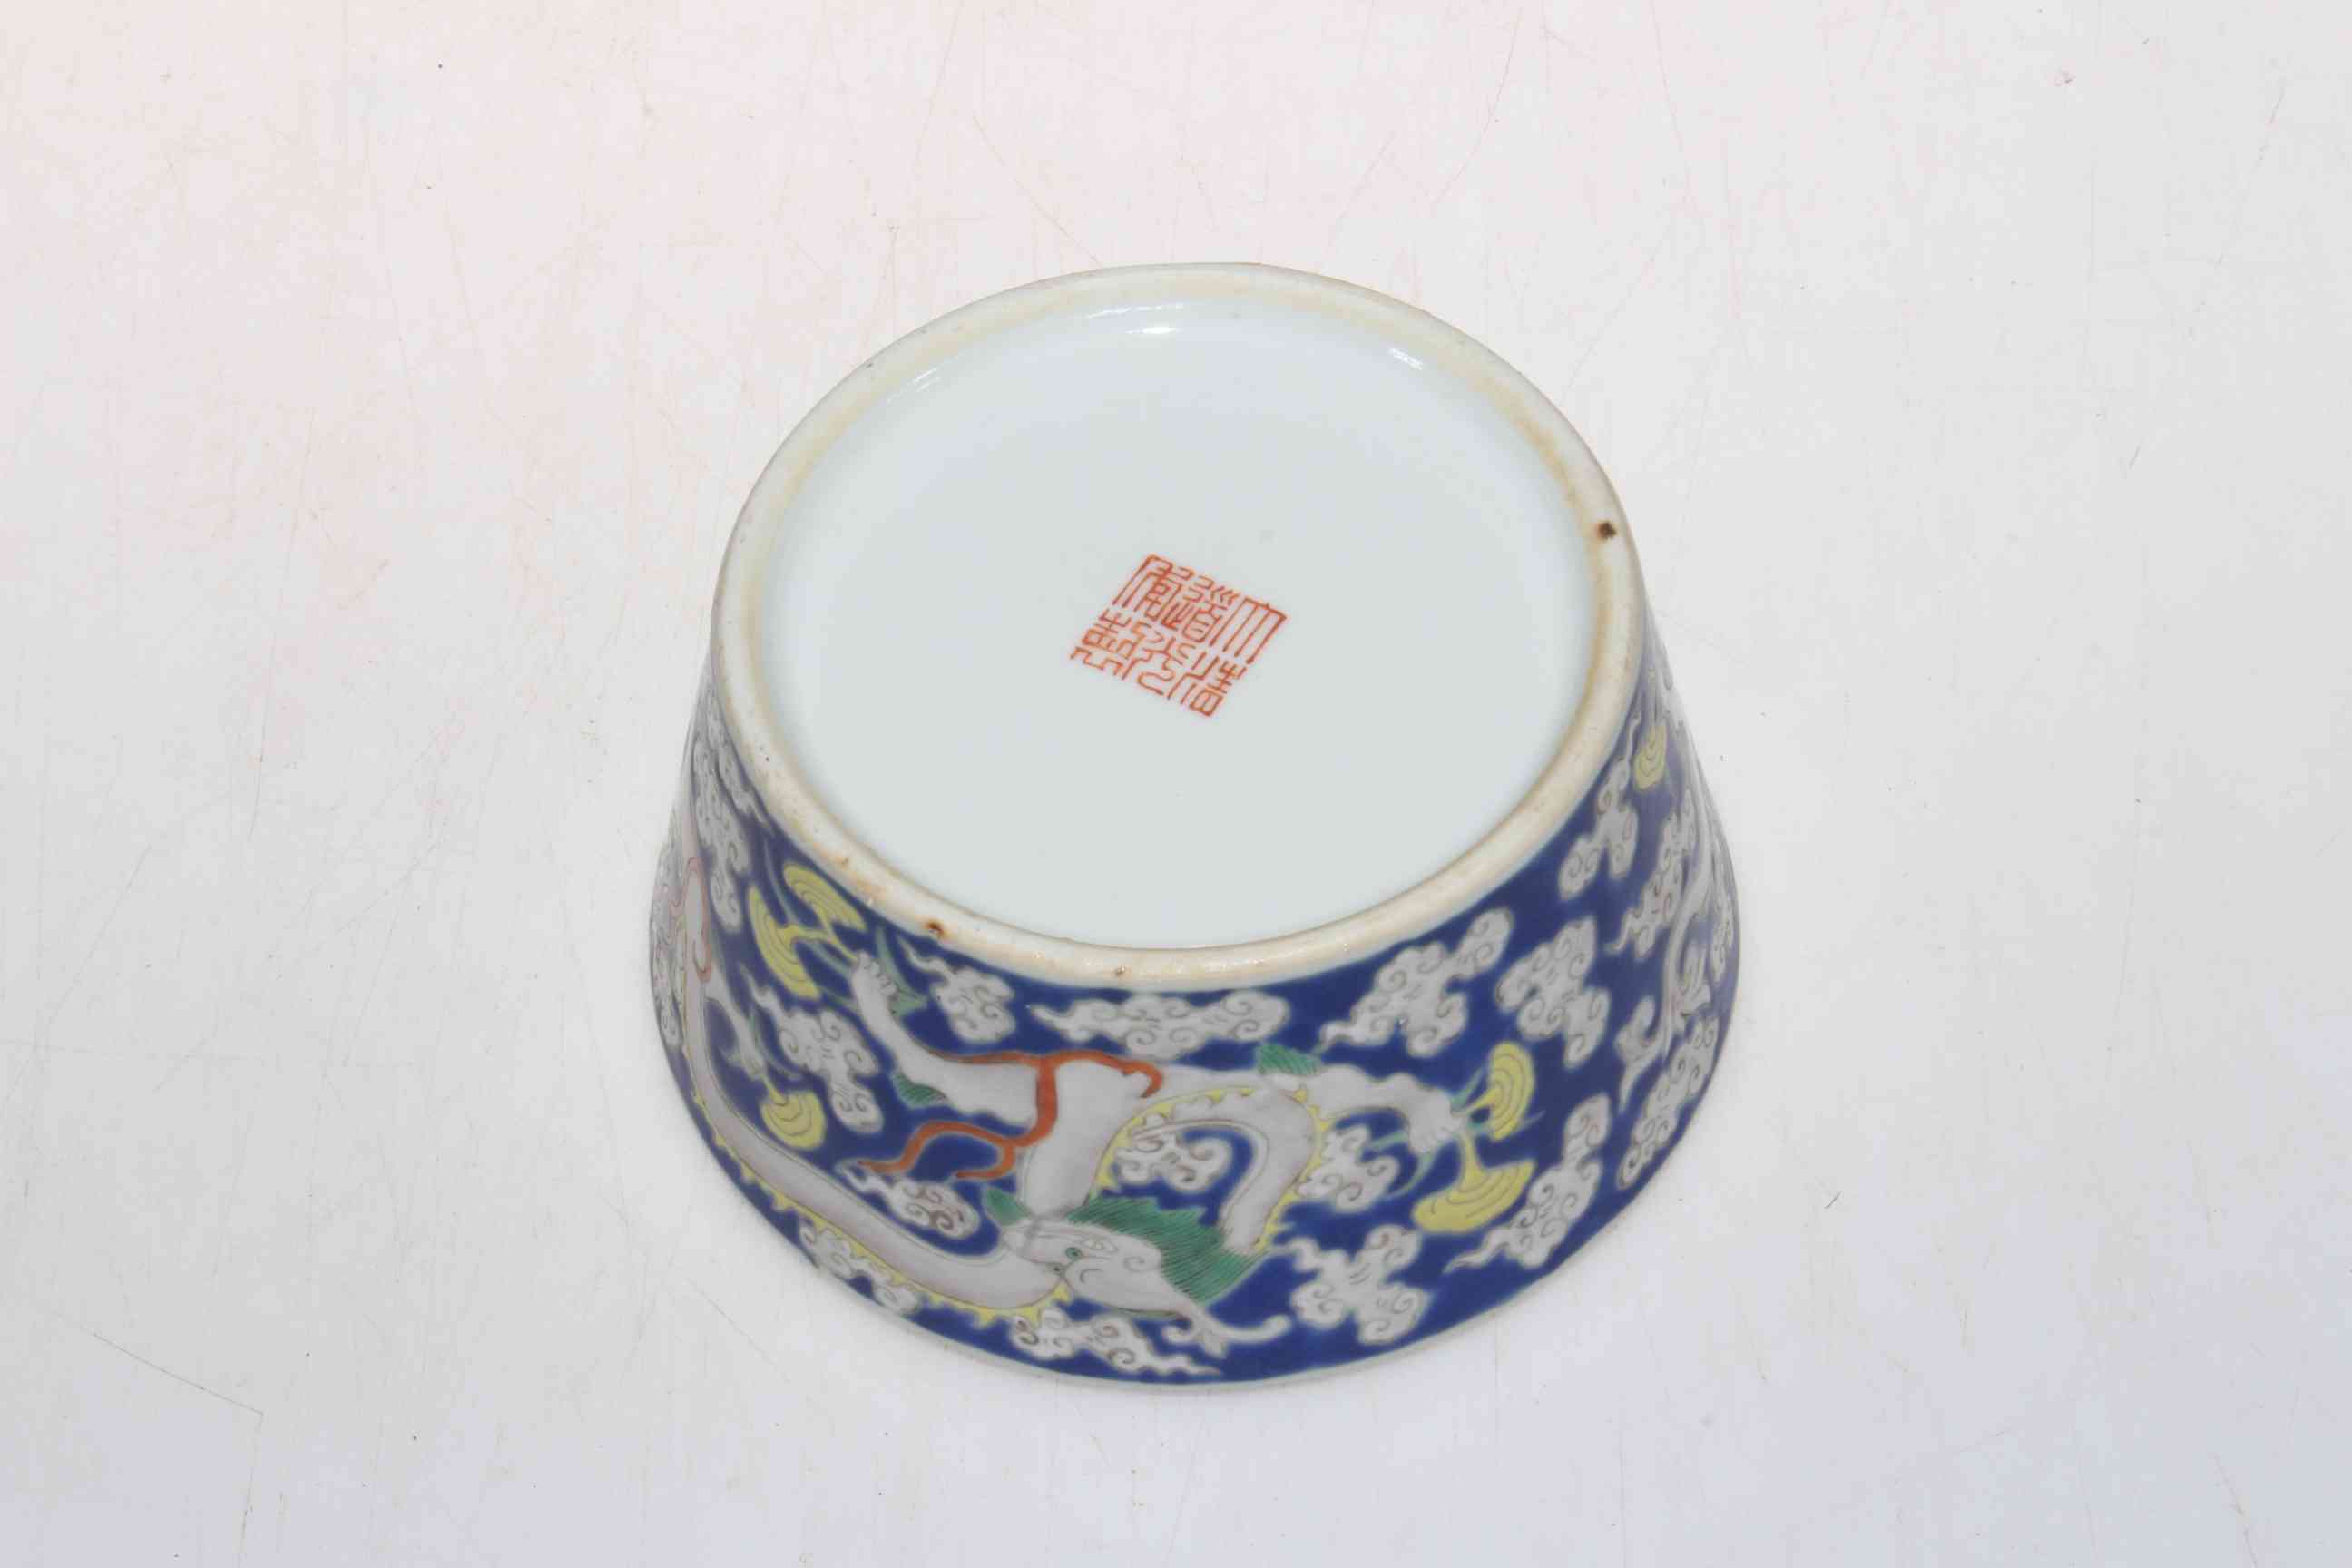 Chinese brush pot with trailing dragon decoration and Grecian key border, 11cm diameter. - Image 2 of 2